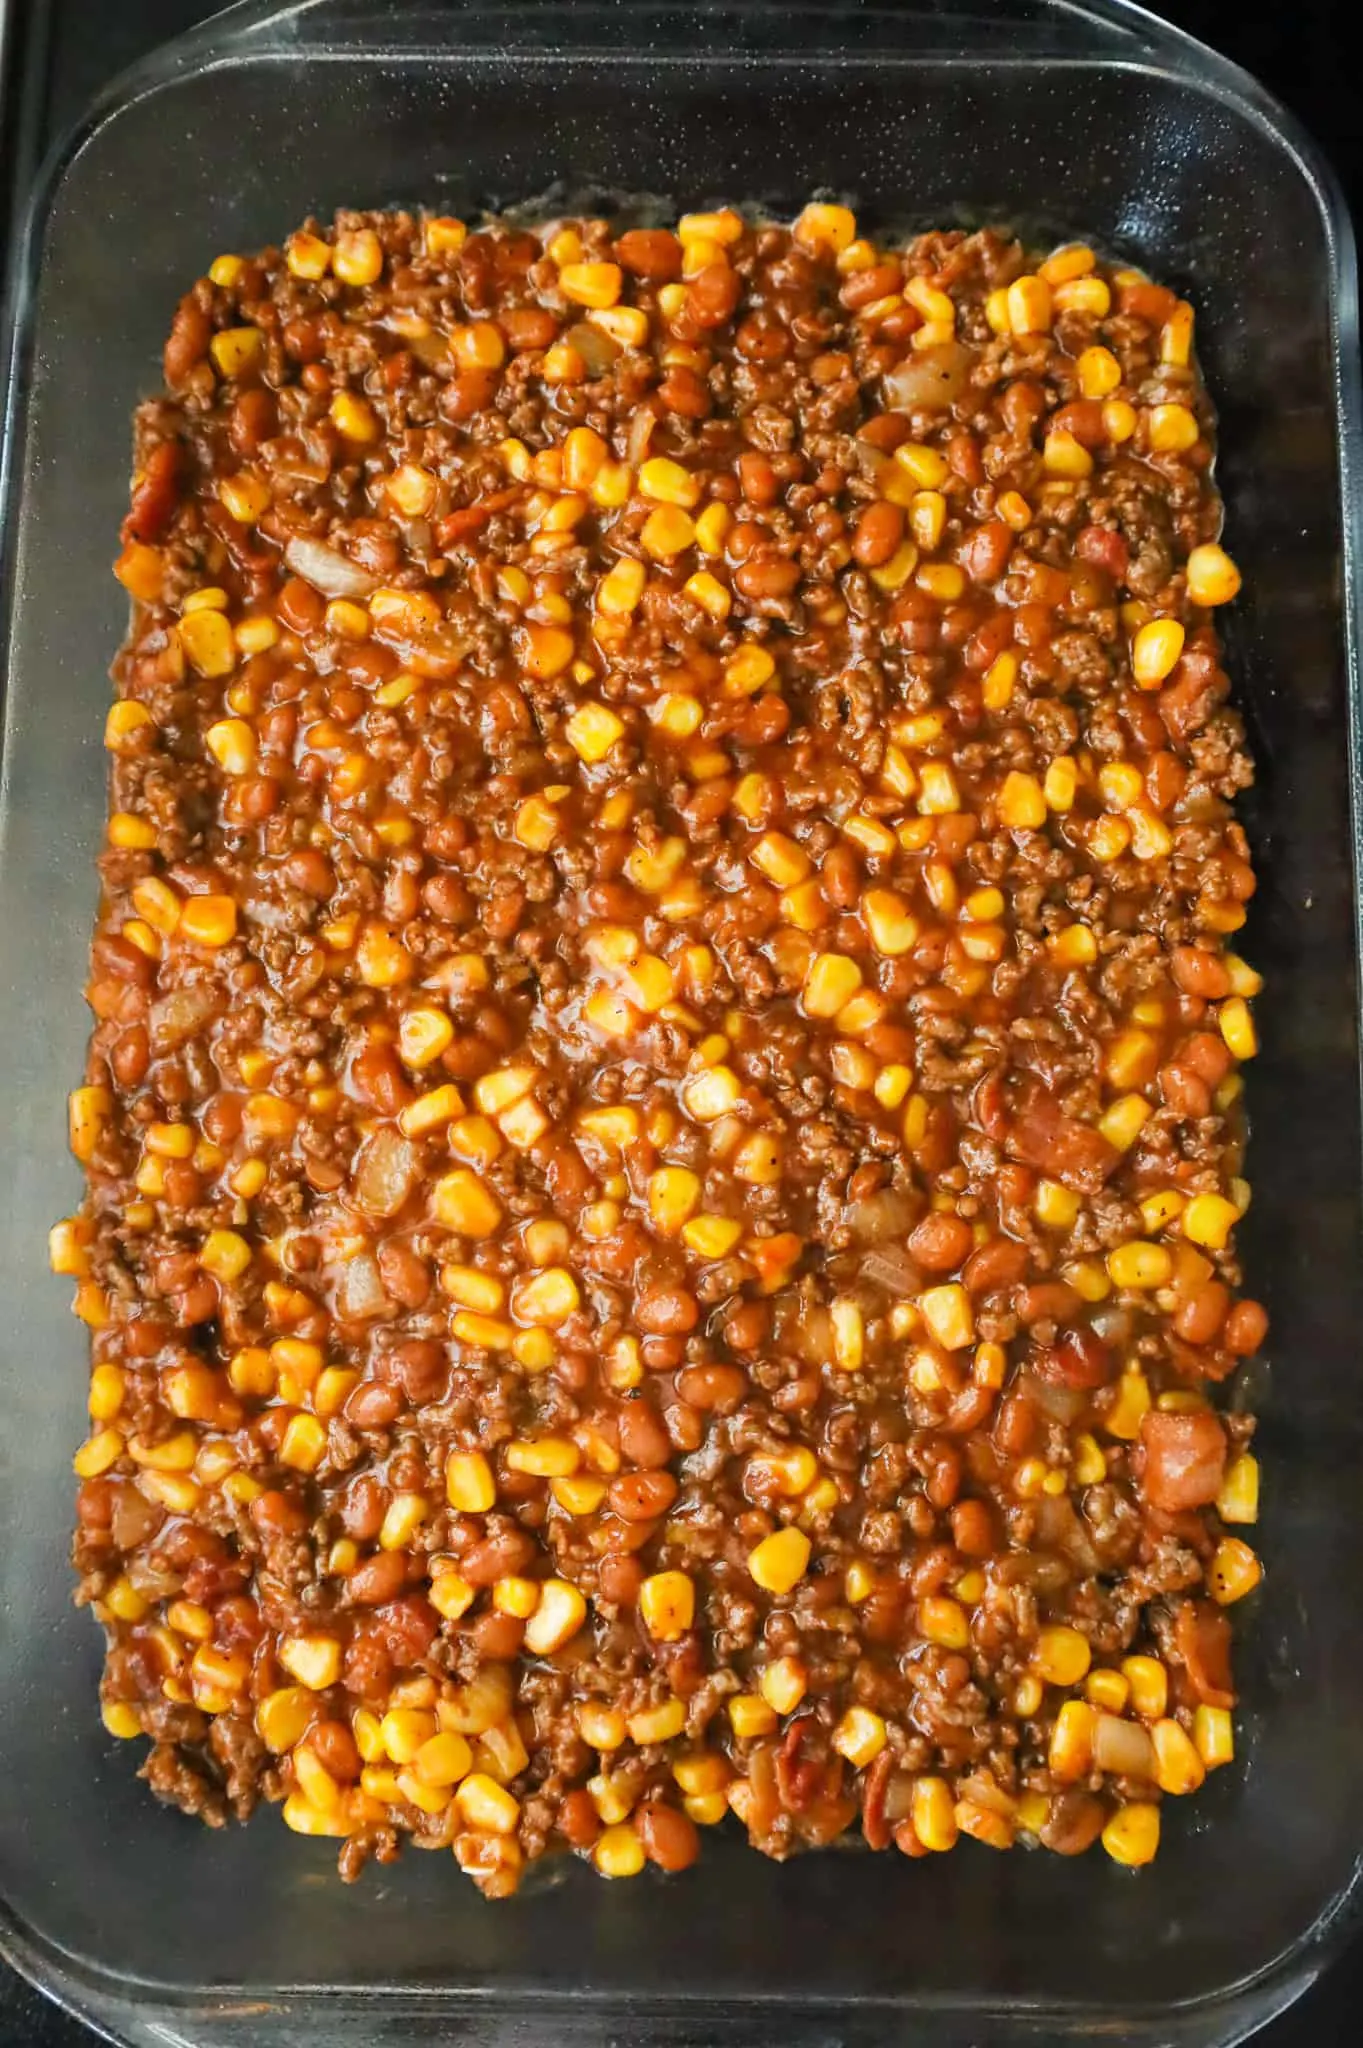 ground beef, corn and bean mixture in a baking dish